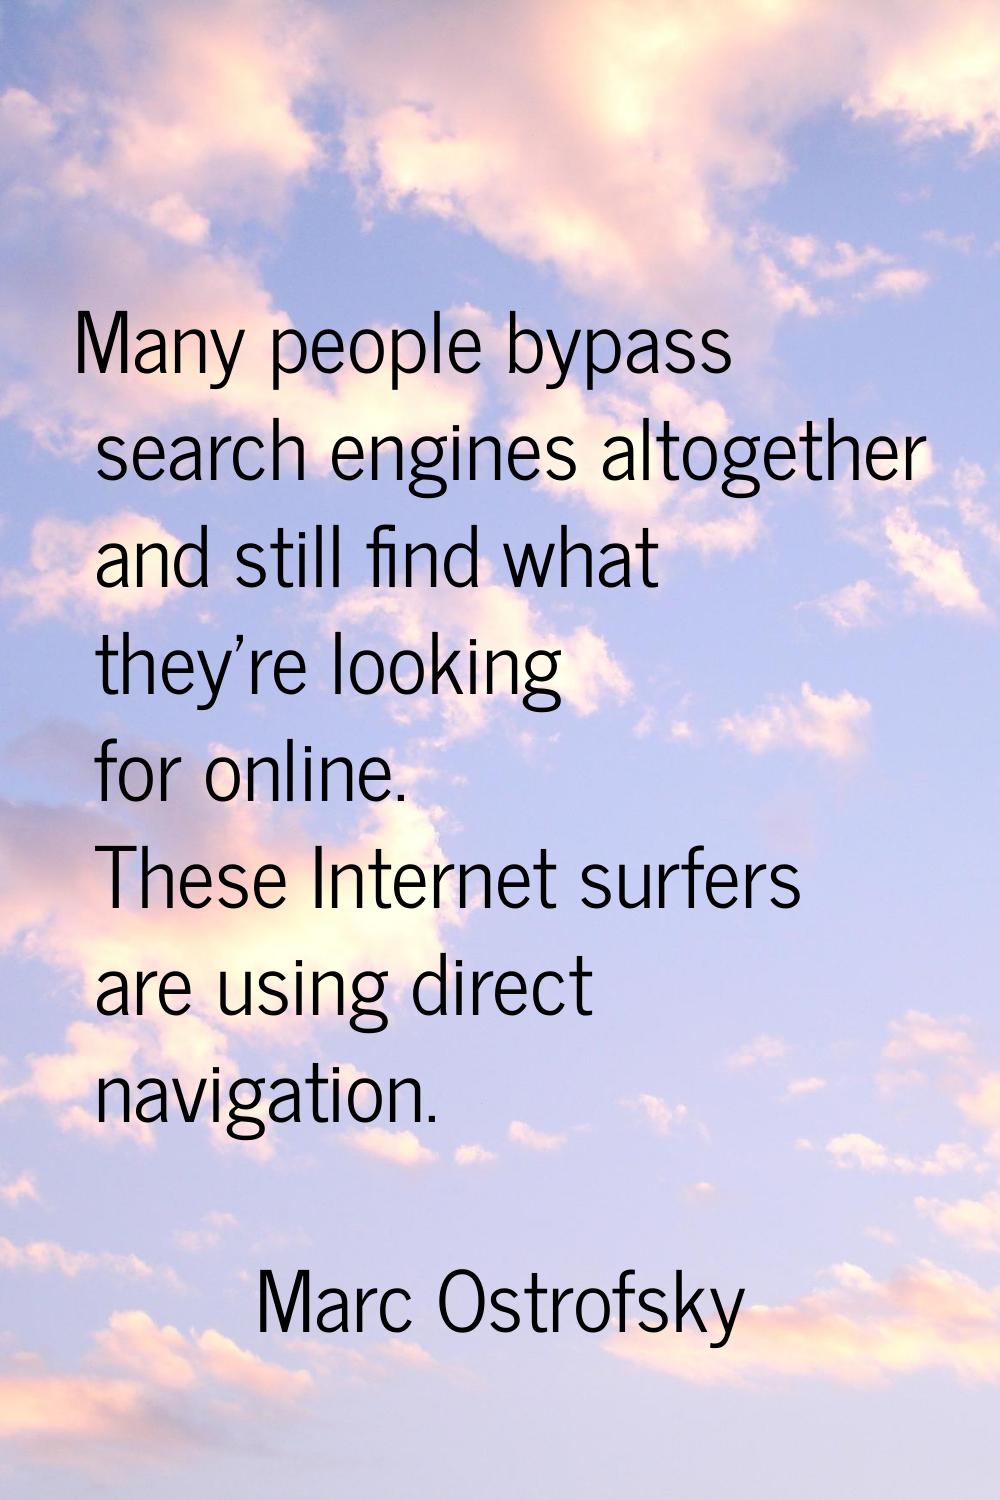 Many people bypass search engines altogether and still find what they're looking for online. These 